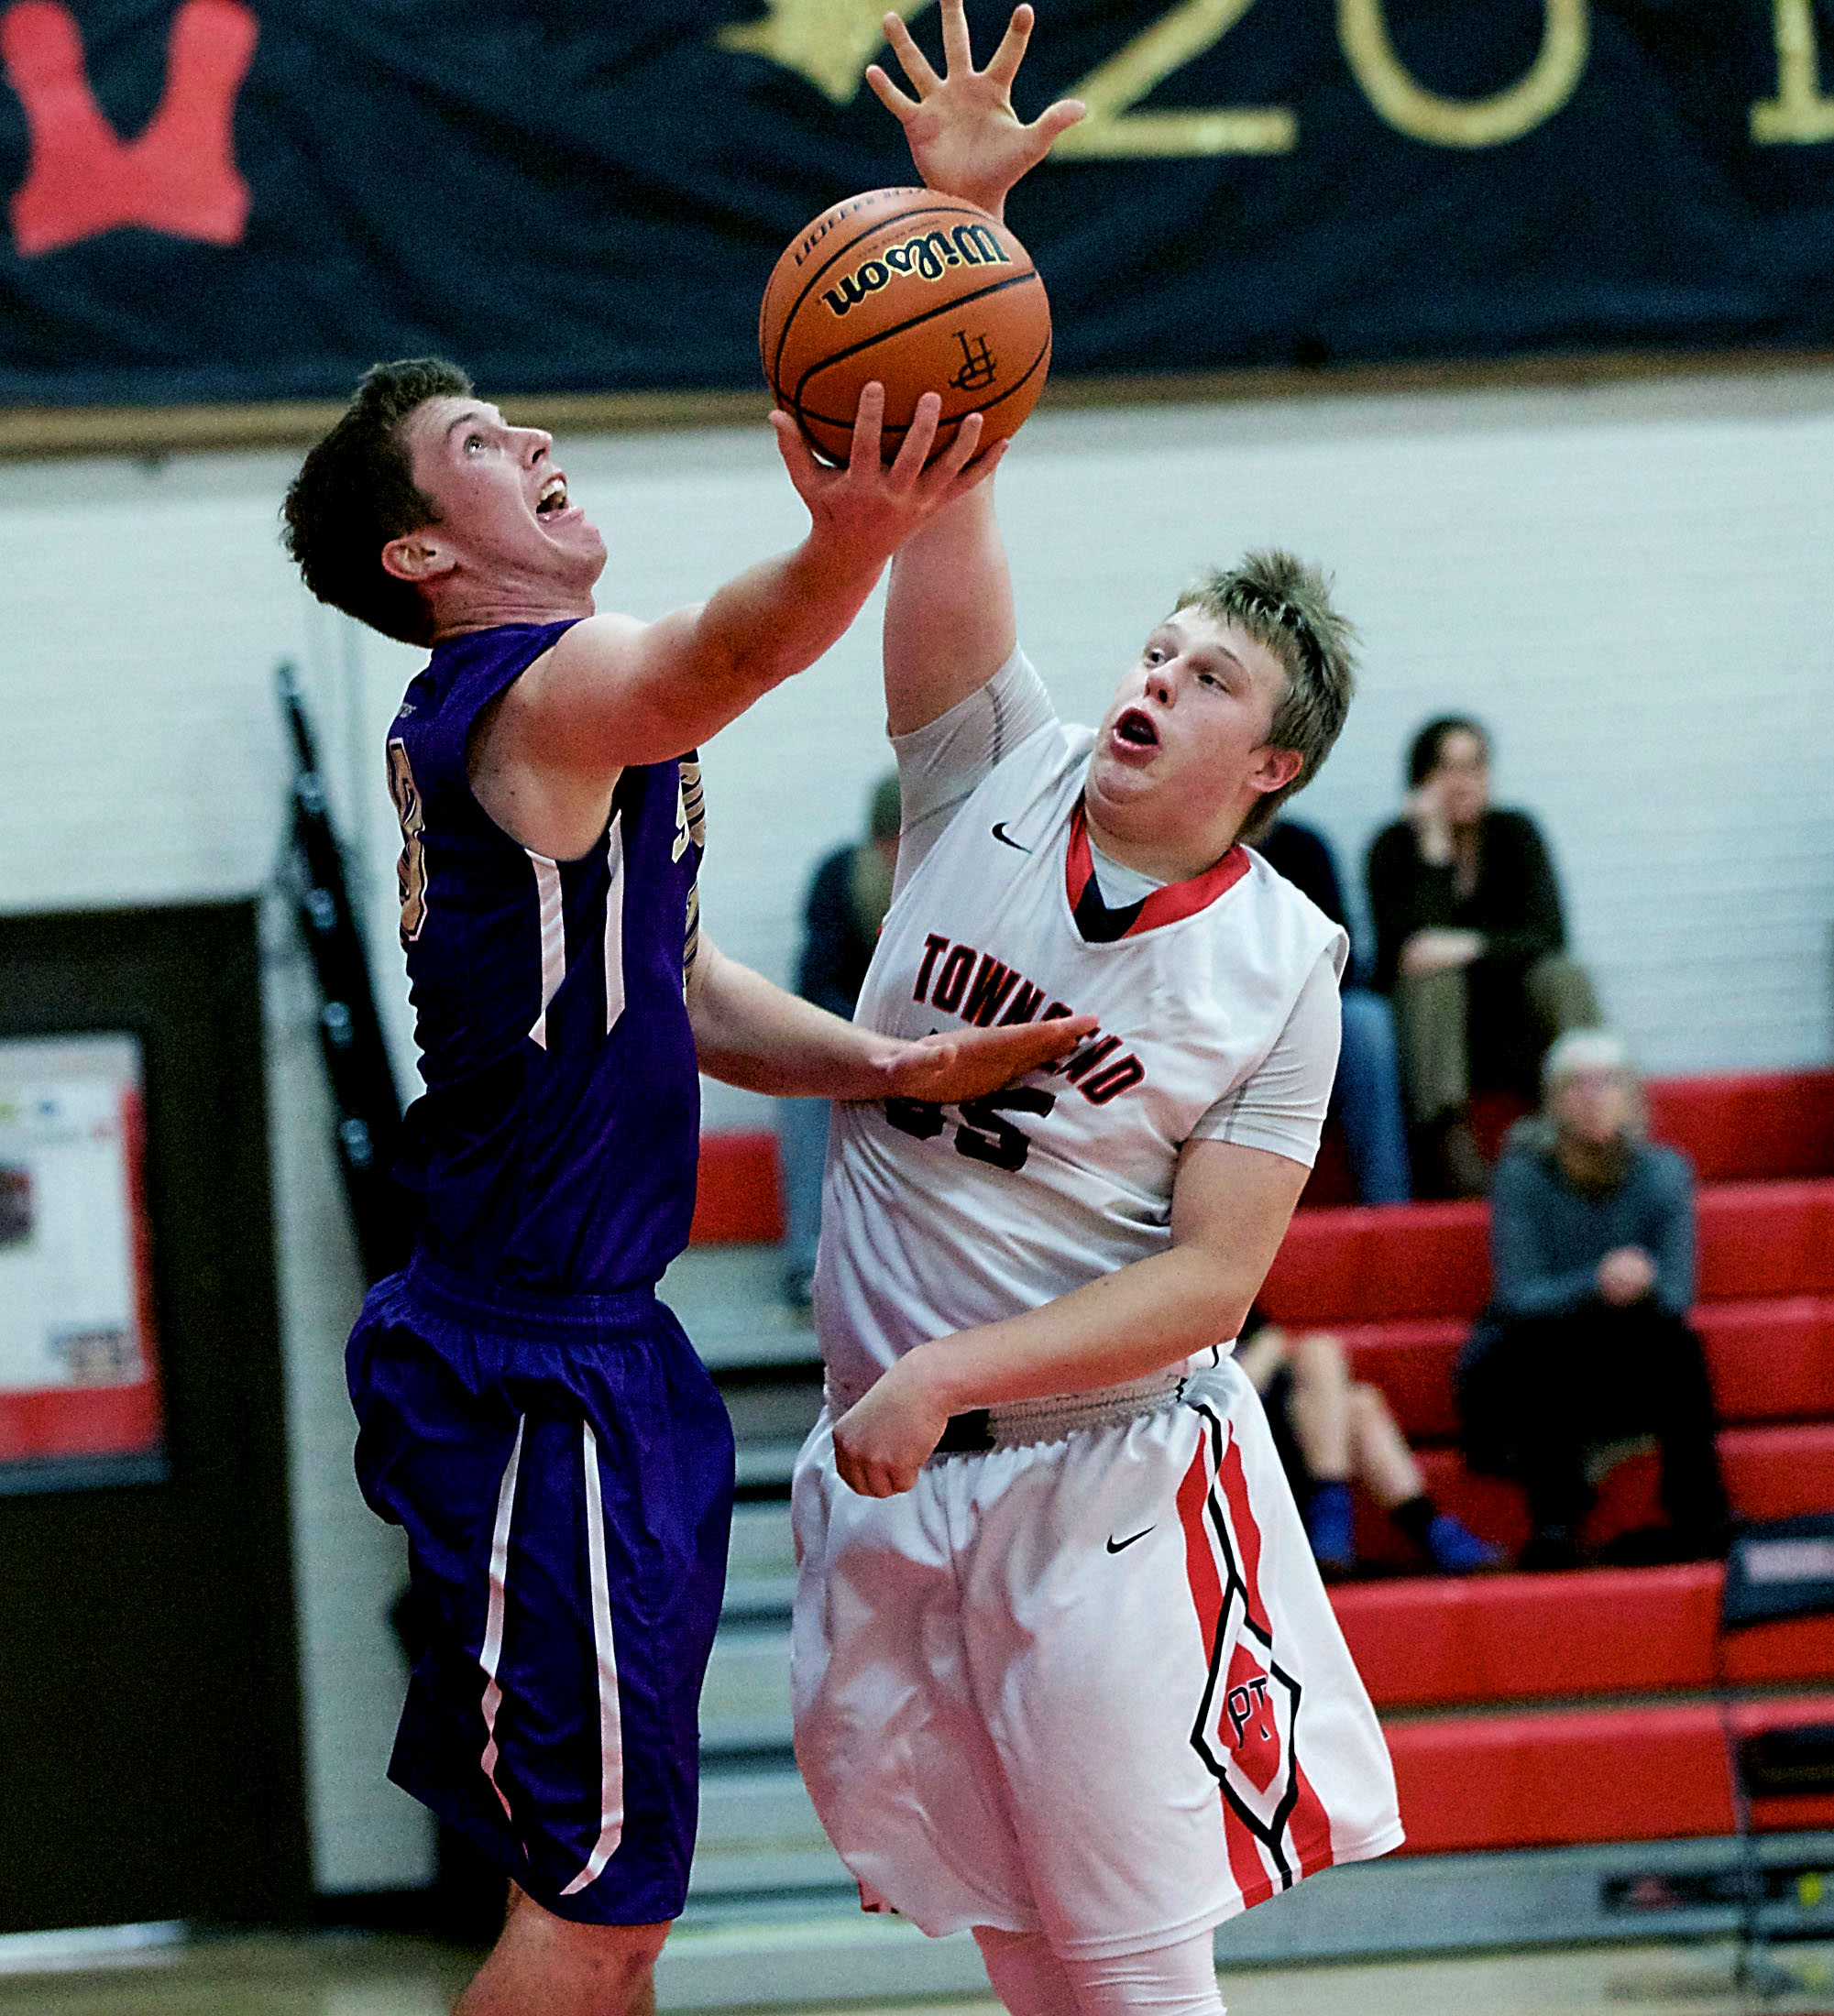 Port Townsend's Kaiden Parcher (55) tries to block a shot by Sequim's Jack Shea. Steve Mullensky/for Peninsula Daily News